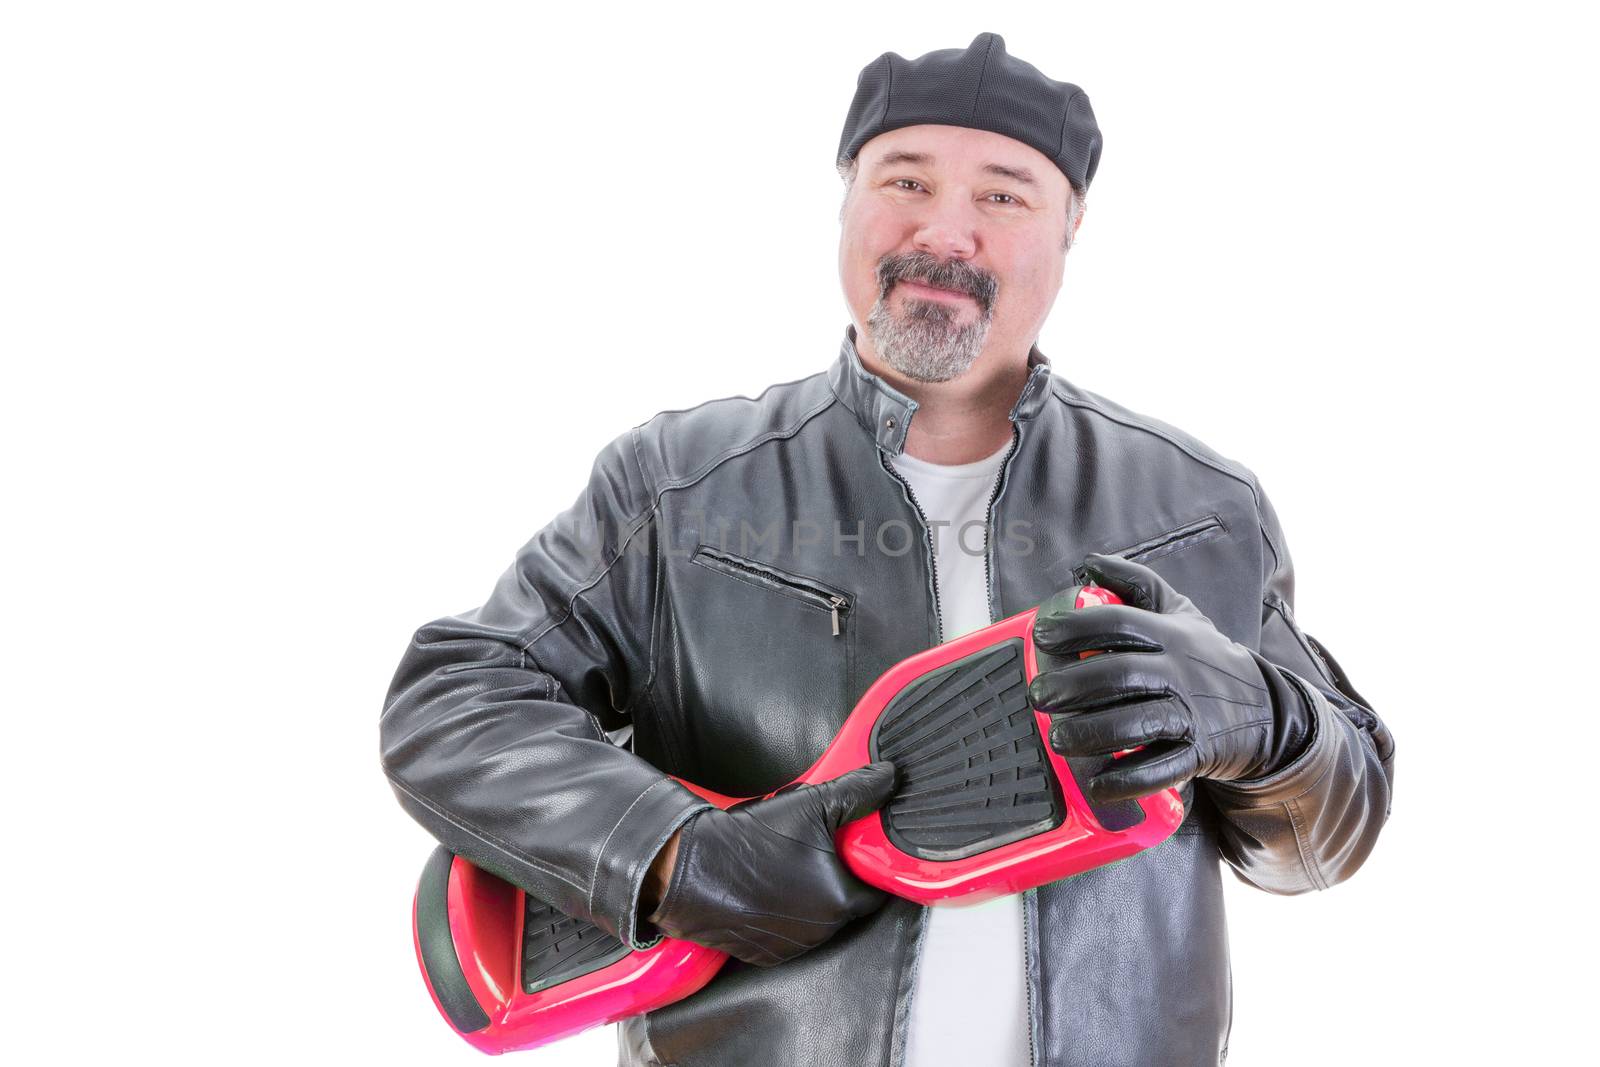 Content middle aged handsome man in hat and leather jacket stands holding a red and black hoverboard in hands with leather gloves